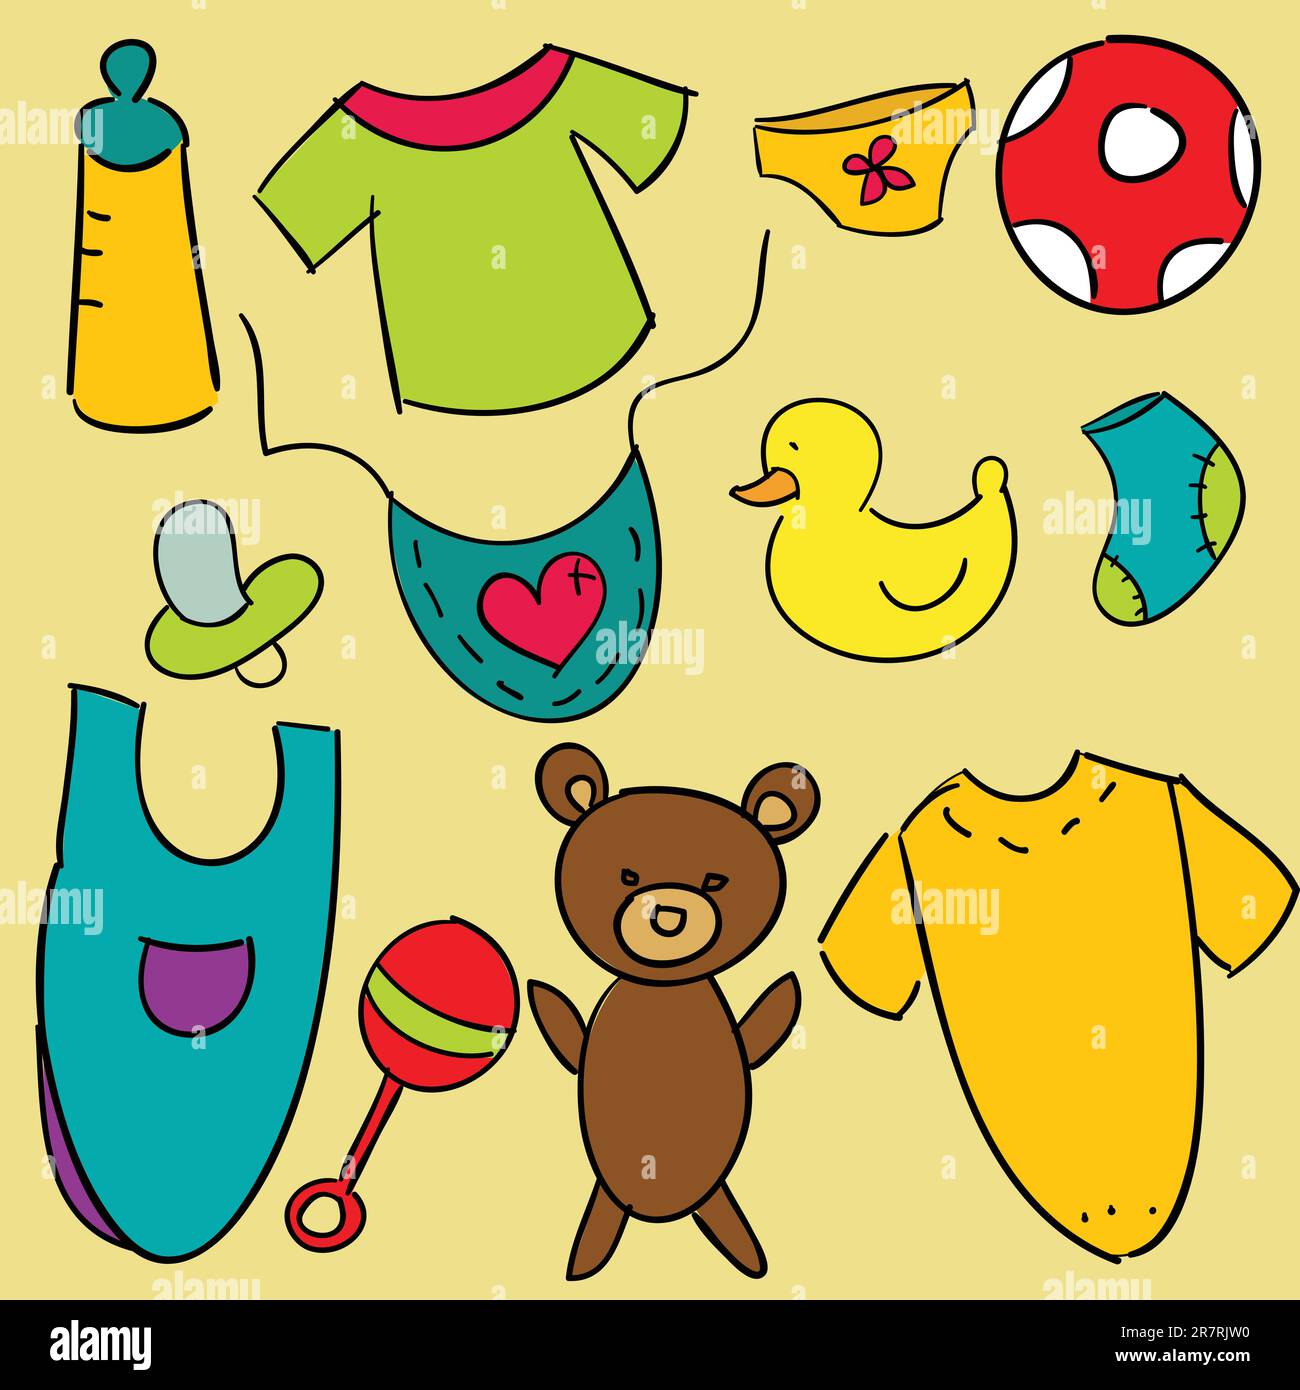 baby icons vector illustration Stock Vector